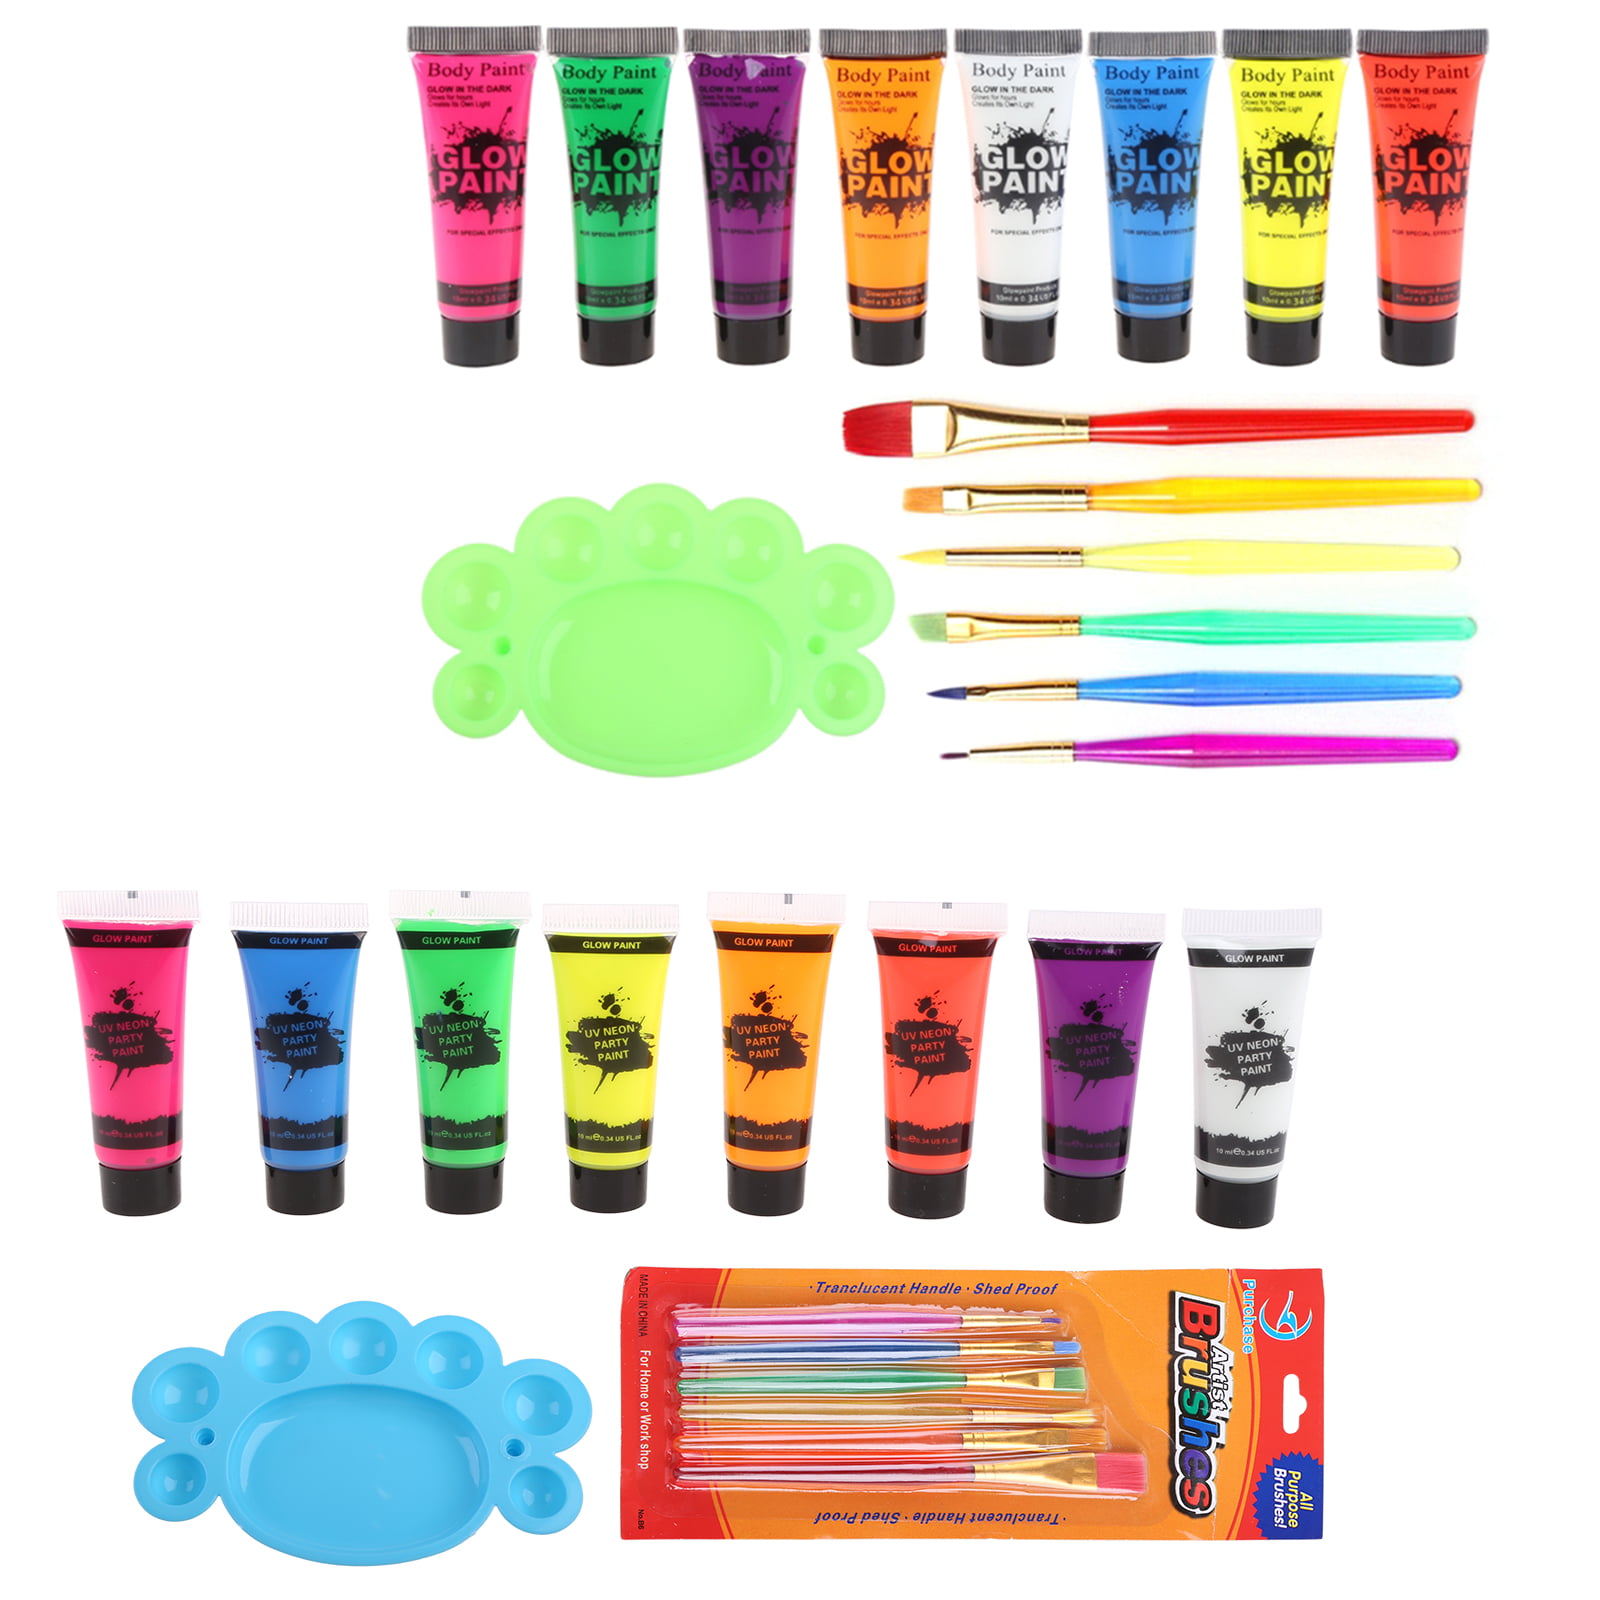  UV Blacklight Neon Face and Body Paint, 8 Tubes 0.84oz Glow in  the Dark Body Paints, Neon Fluorescent Glow in Dark Party Supplies : Beauty  & Personal Care